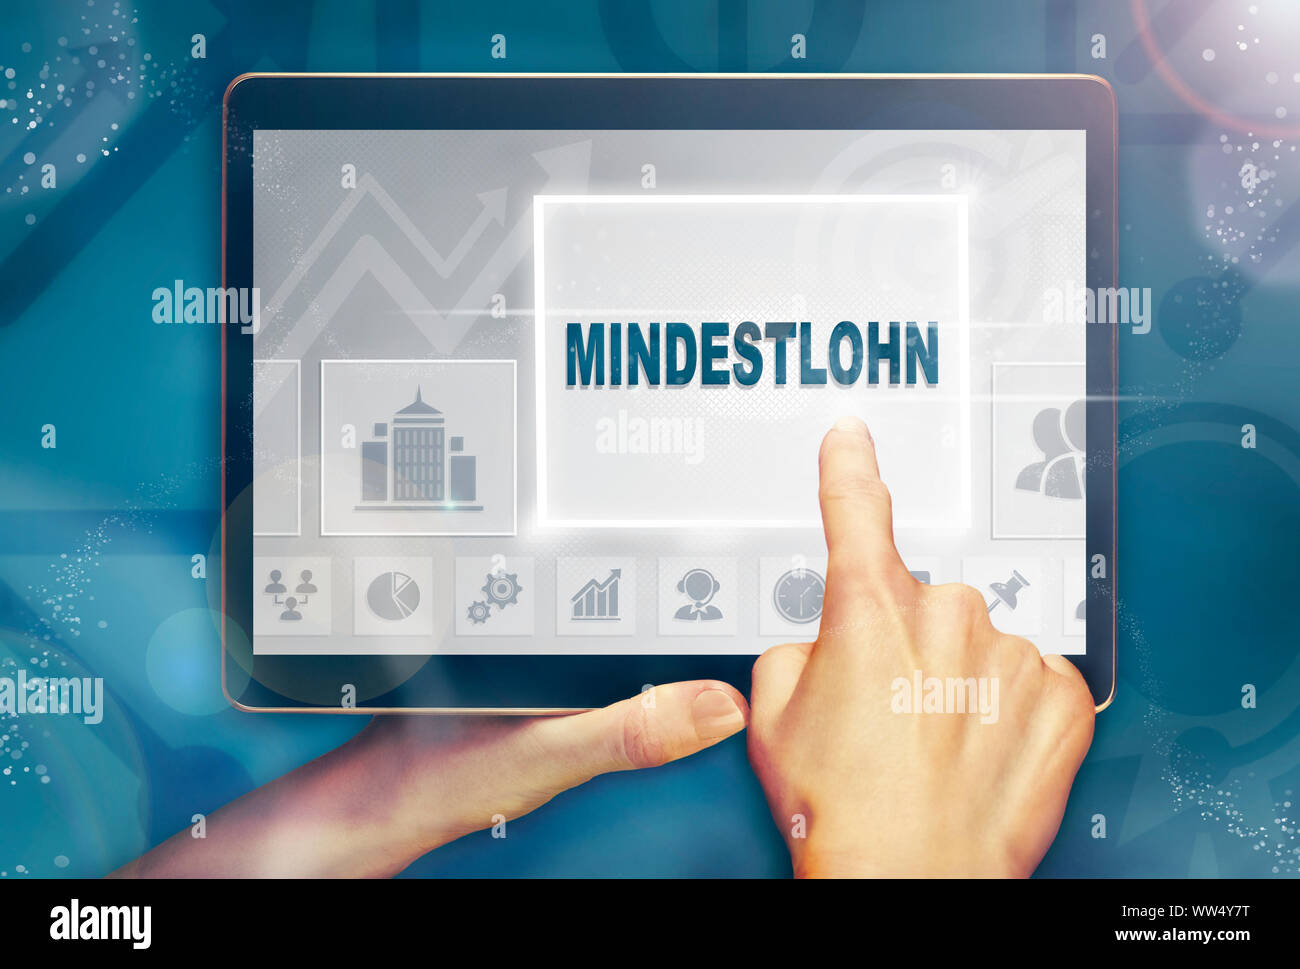 A hand holiding a computer tablet and pressing a Minimum Wage "Mindestlohn" business concept. Stock Photo